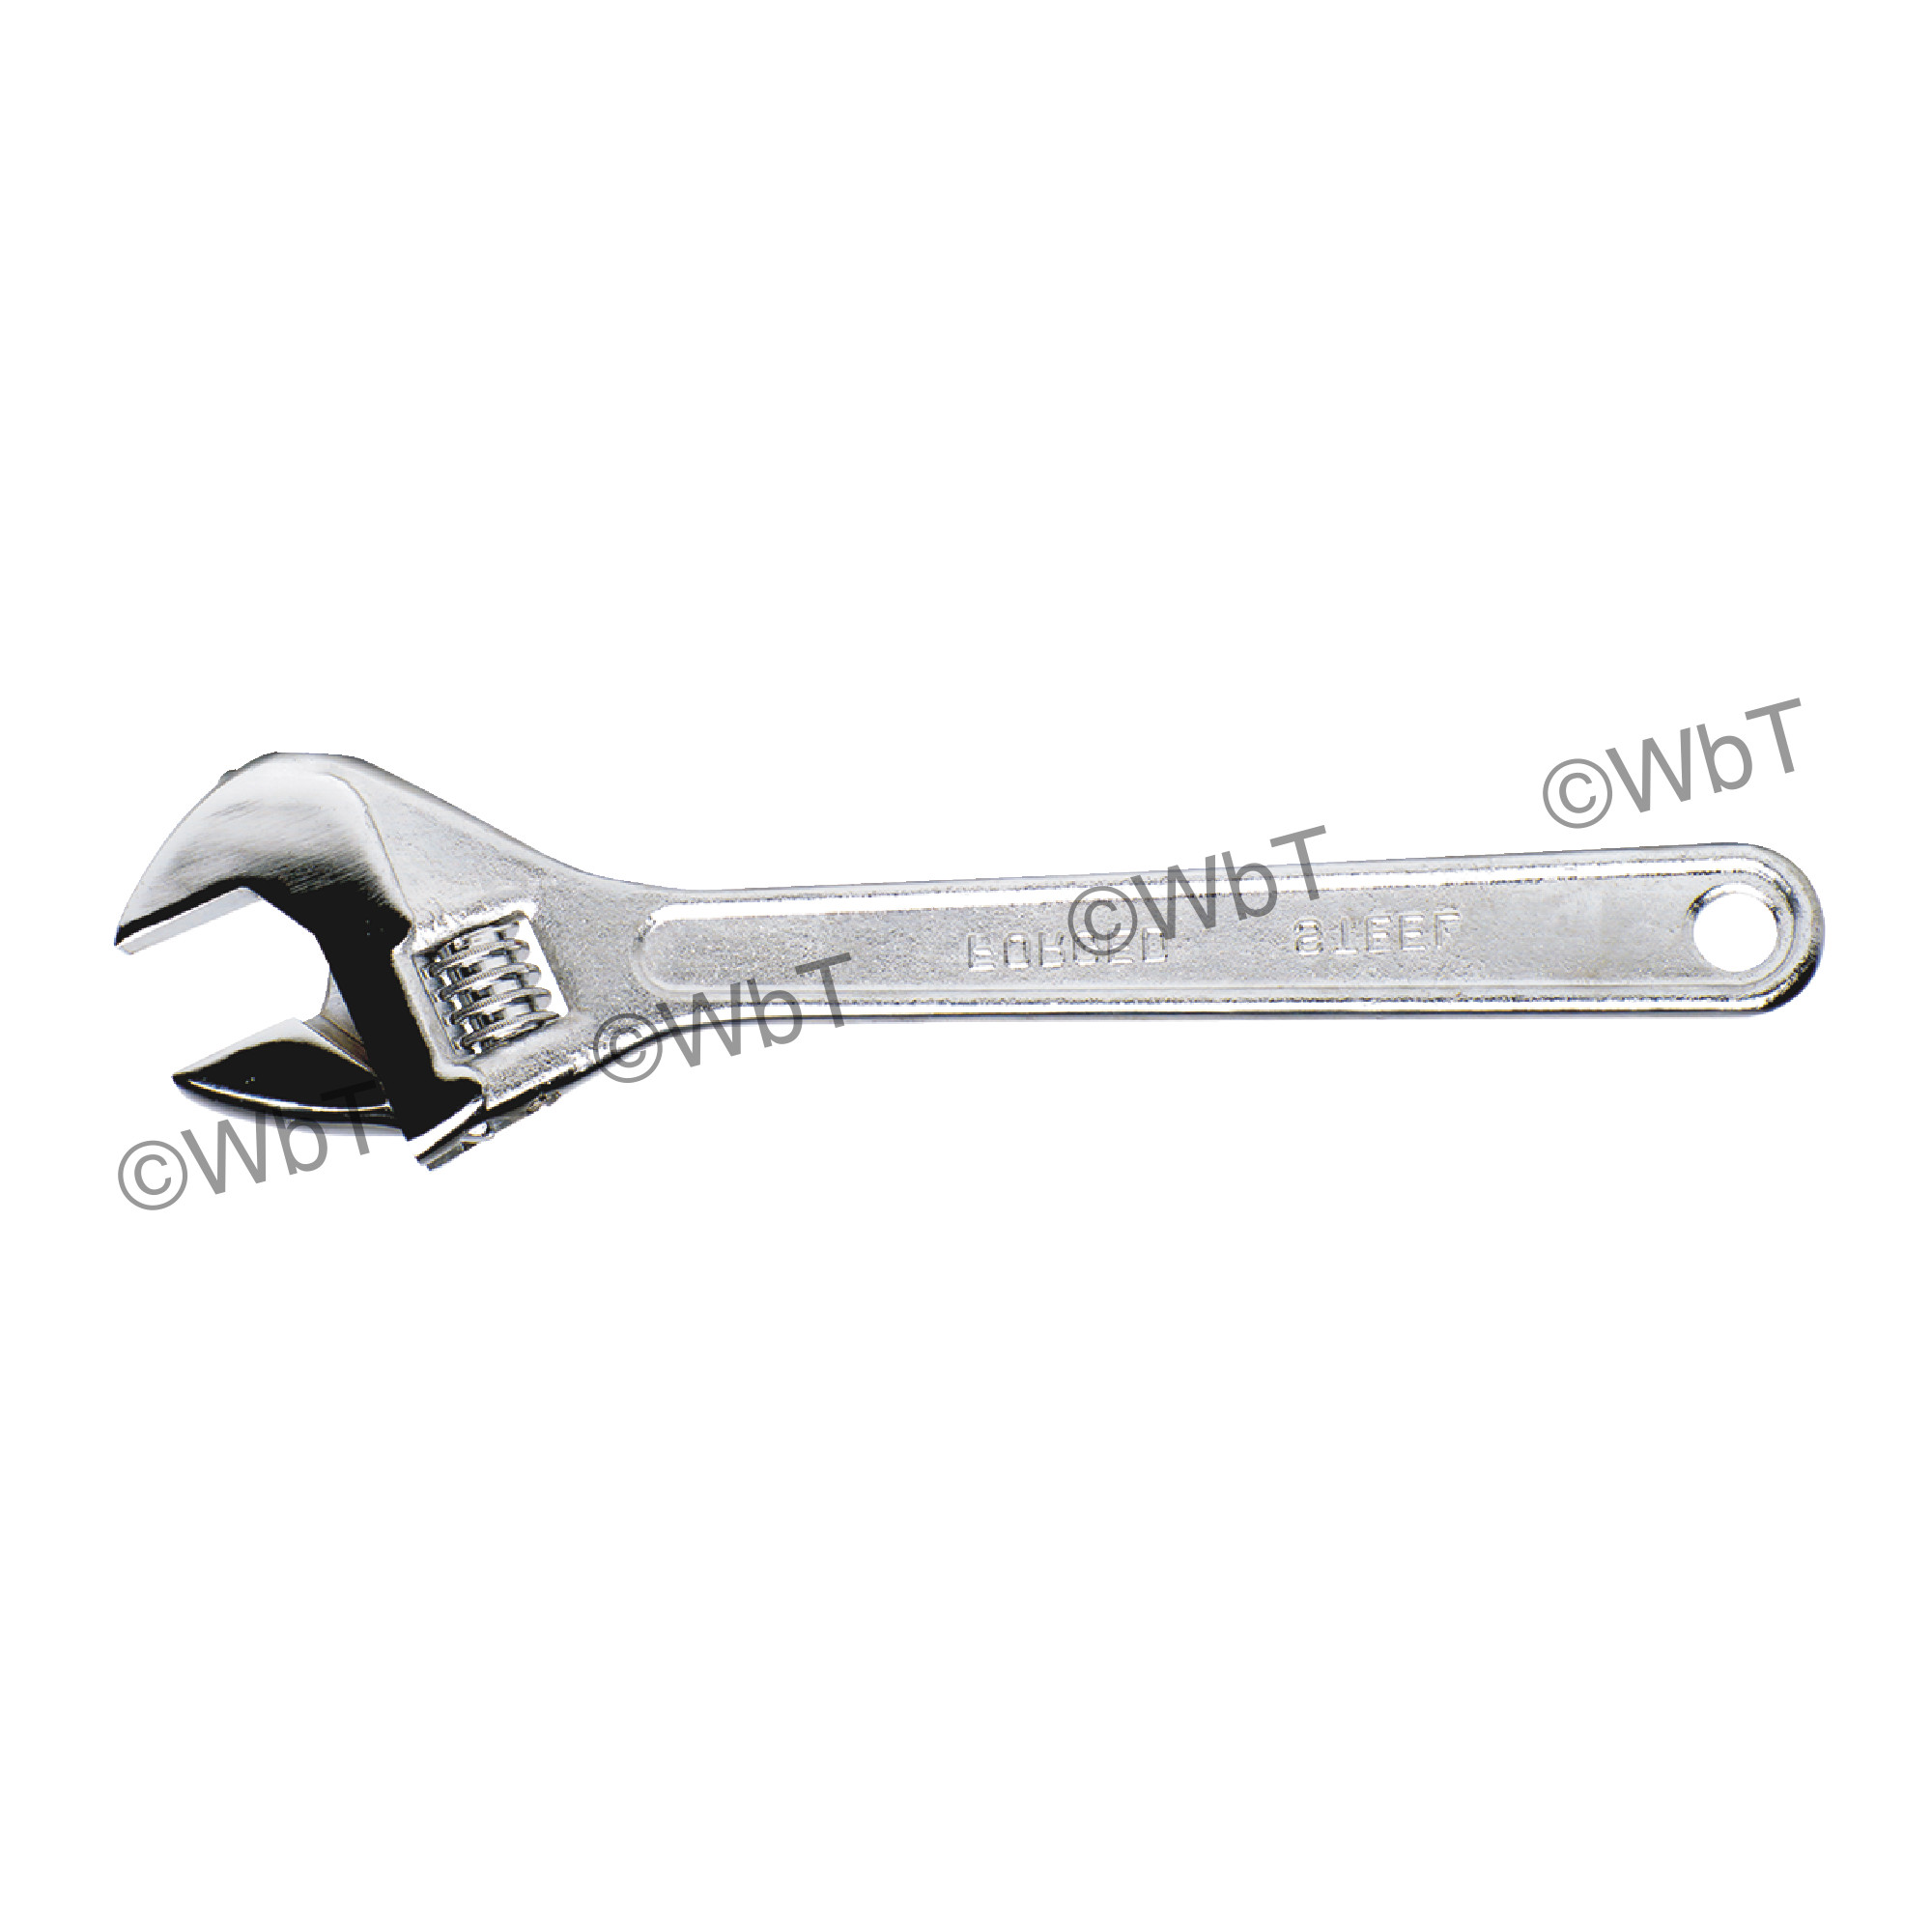 Adjustable Wrench - Model: 5031   SIZE: 6"   Capacity: 3/4"